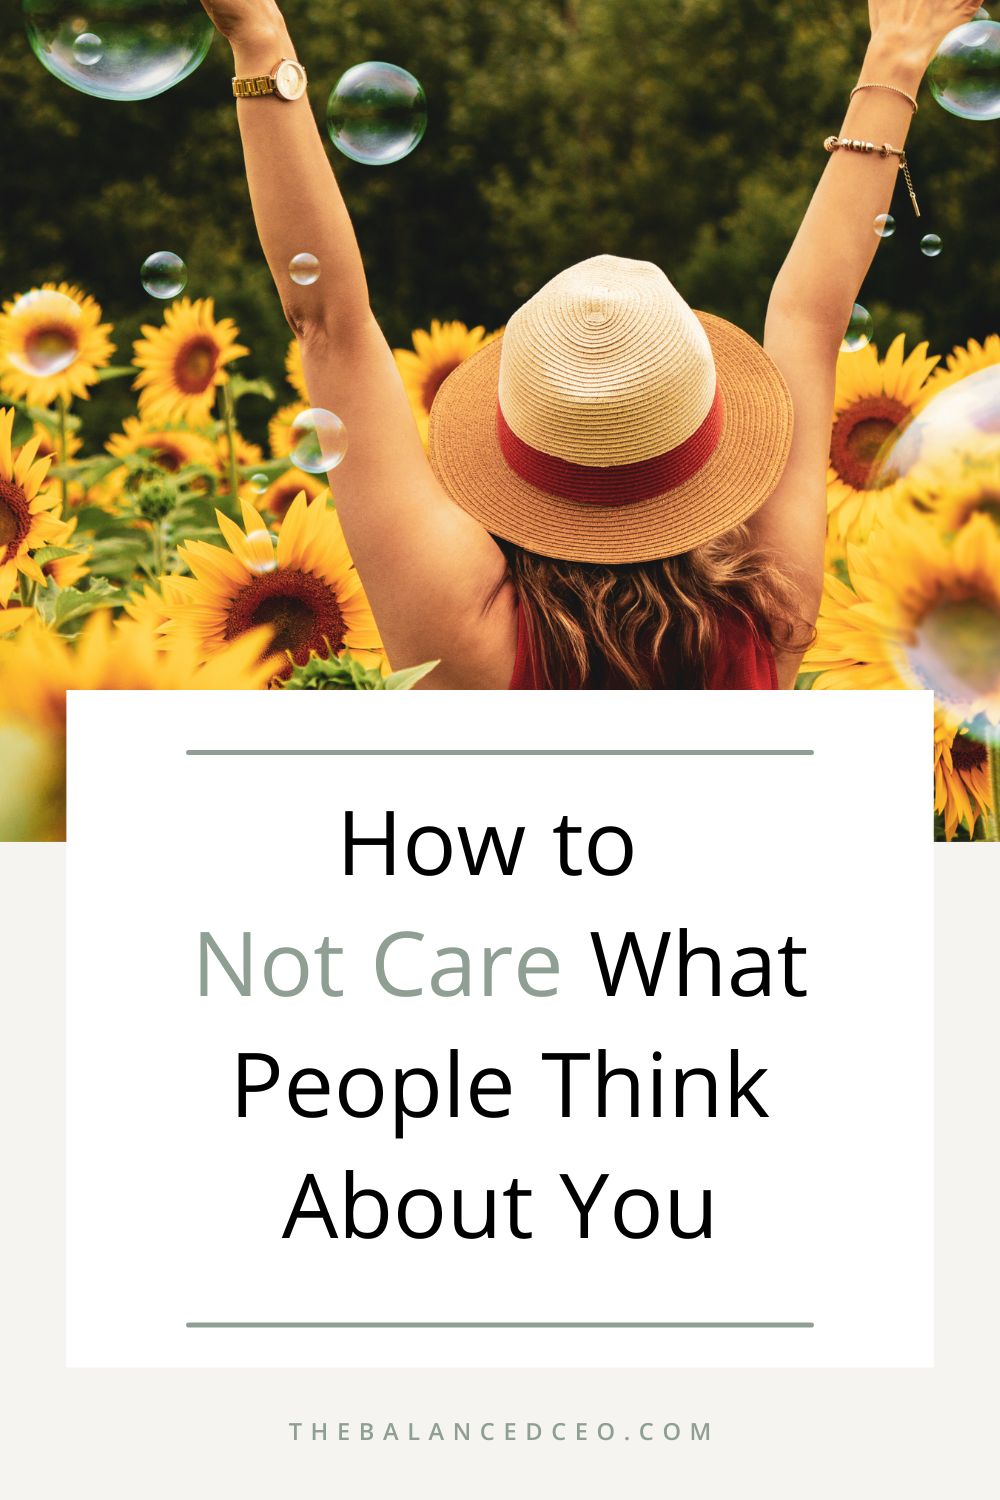 How to Not Care What People Think About You